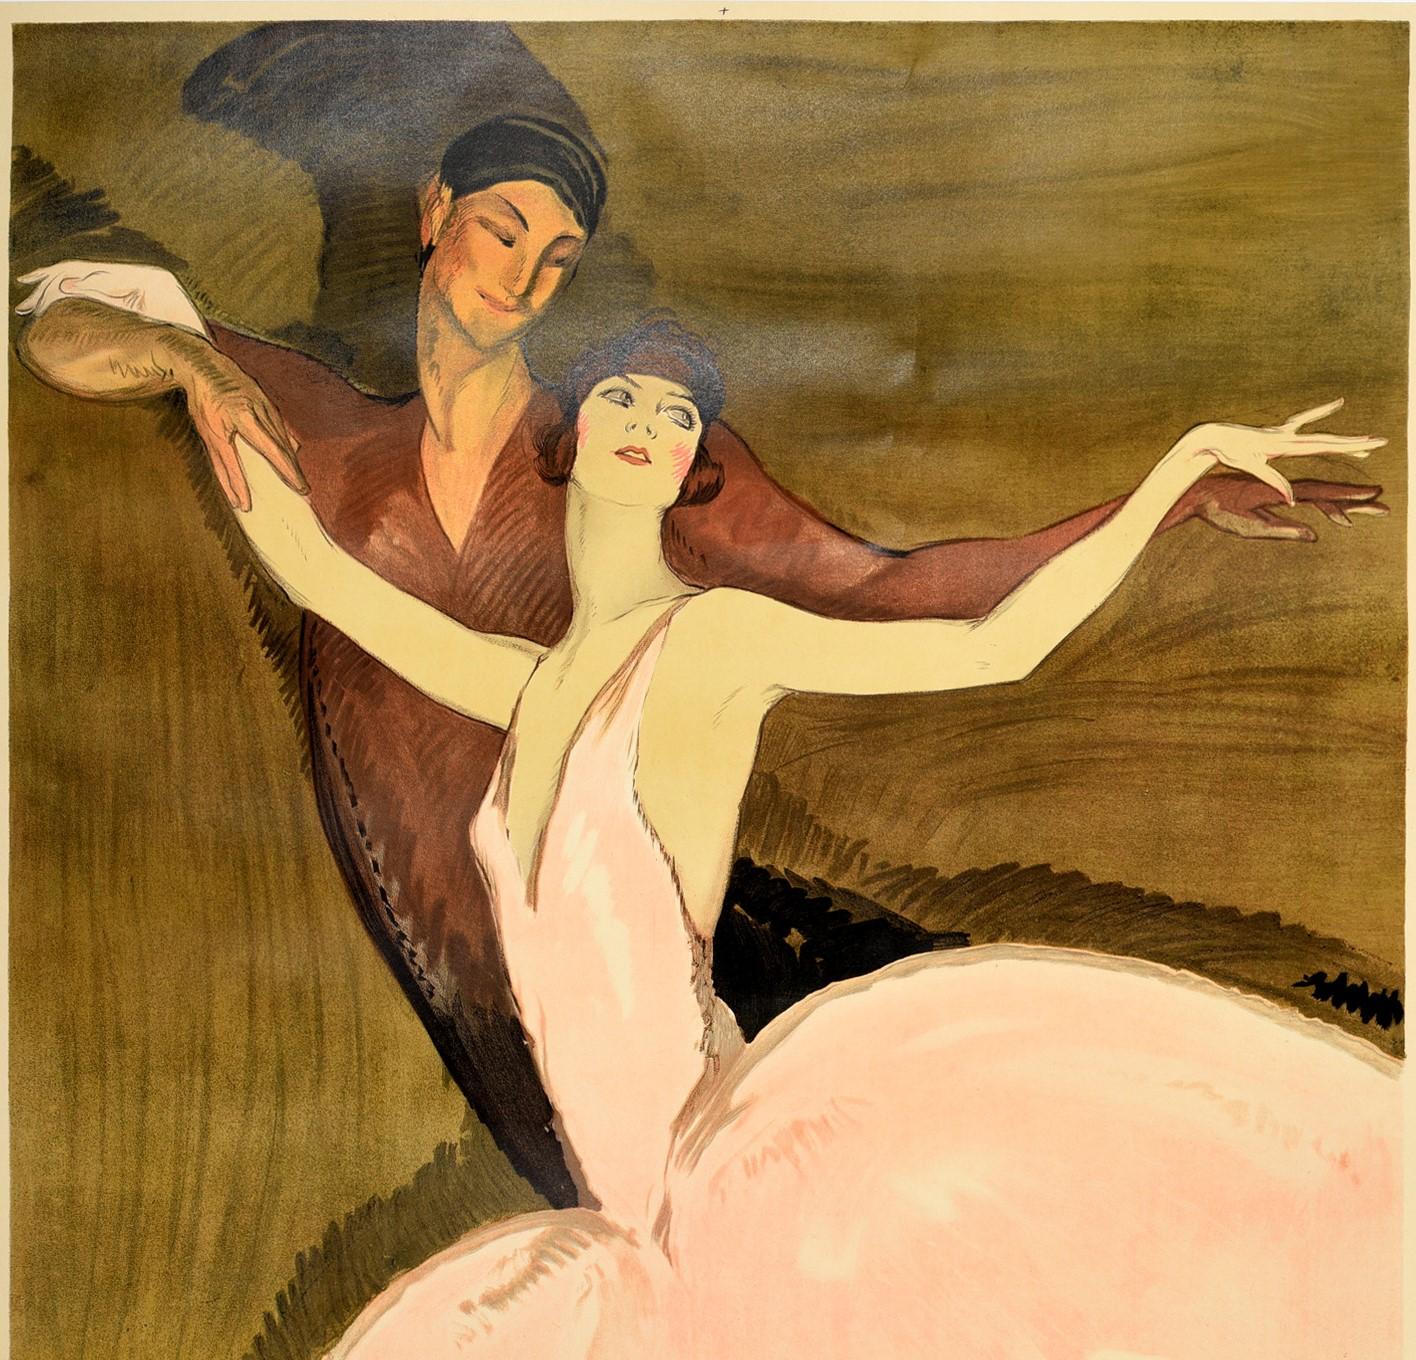 Original vintage ballet dance poster - Emmy Magliani - featuring a great illustration by the French painter Jean-Gabriel Domergue (1889-1962) depicting a man and lady dancing together with the man smiling and looking down at the elegant ballerina in